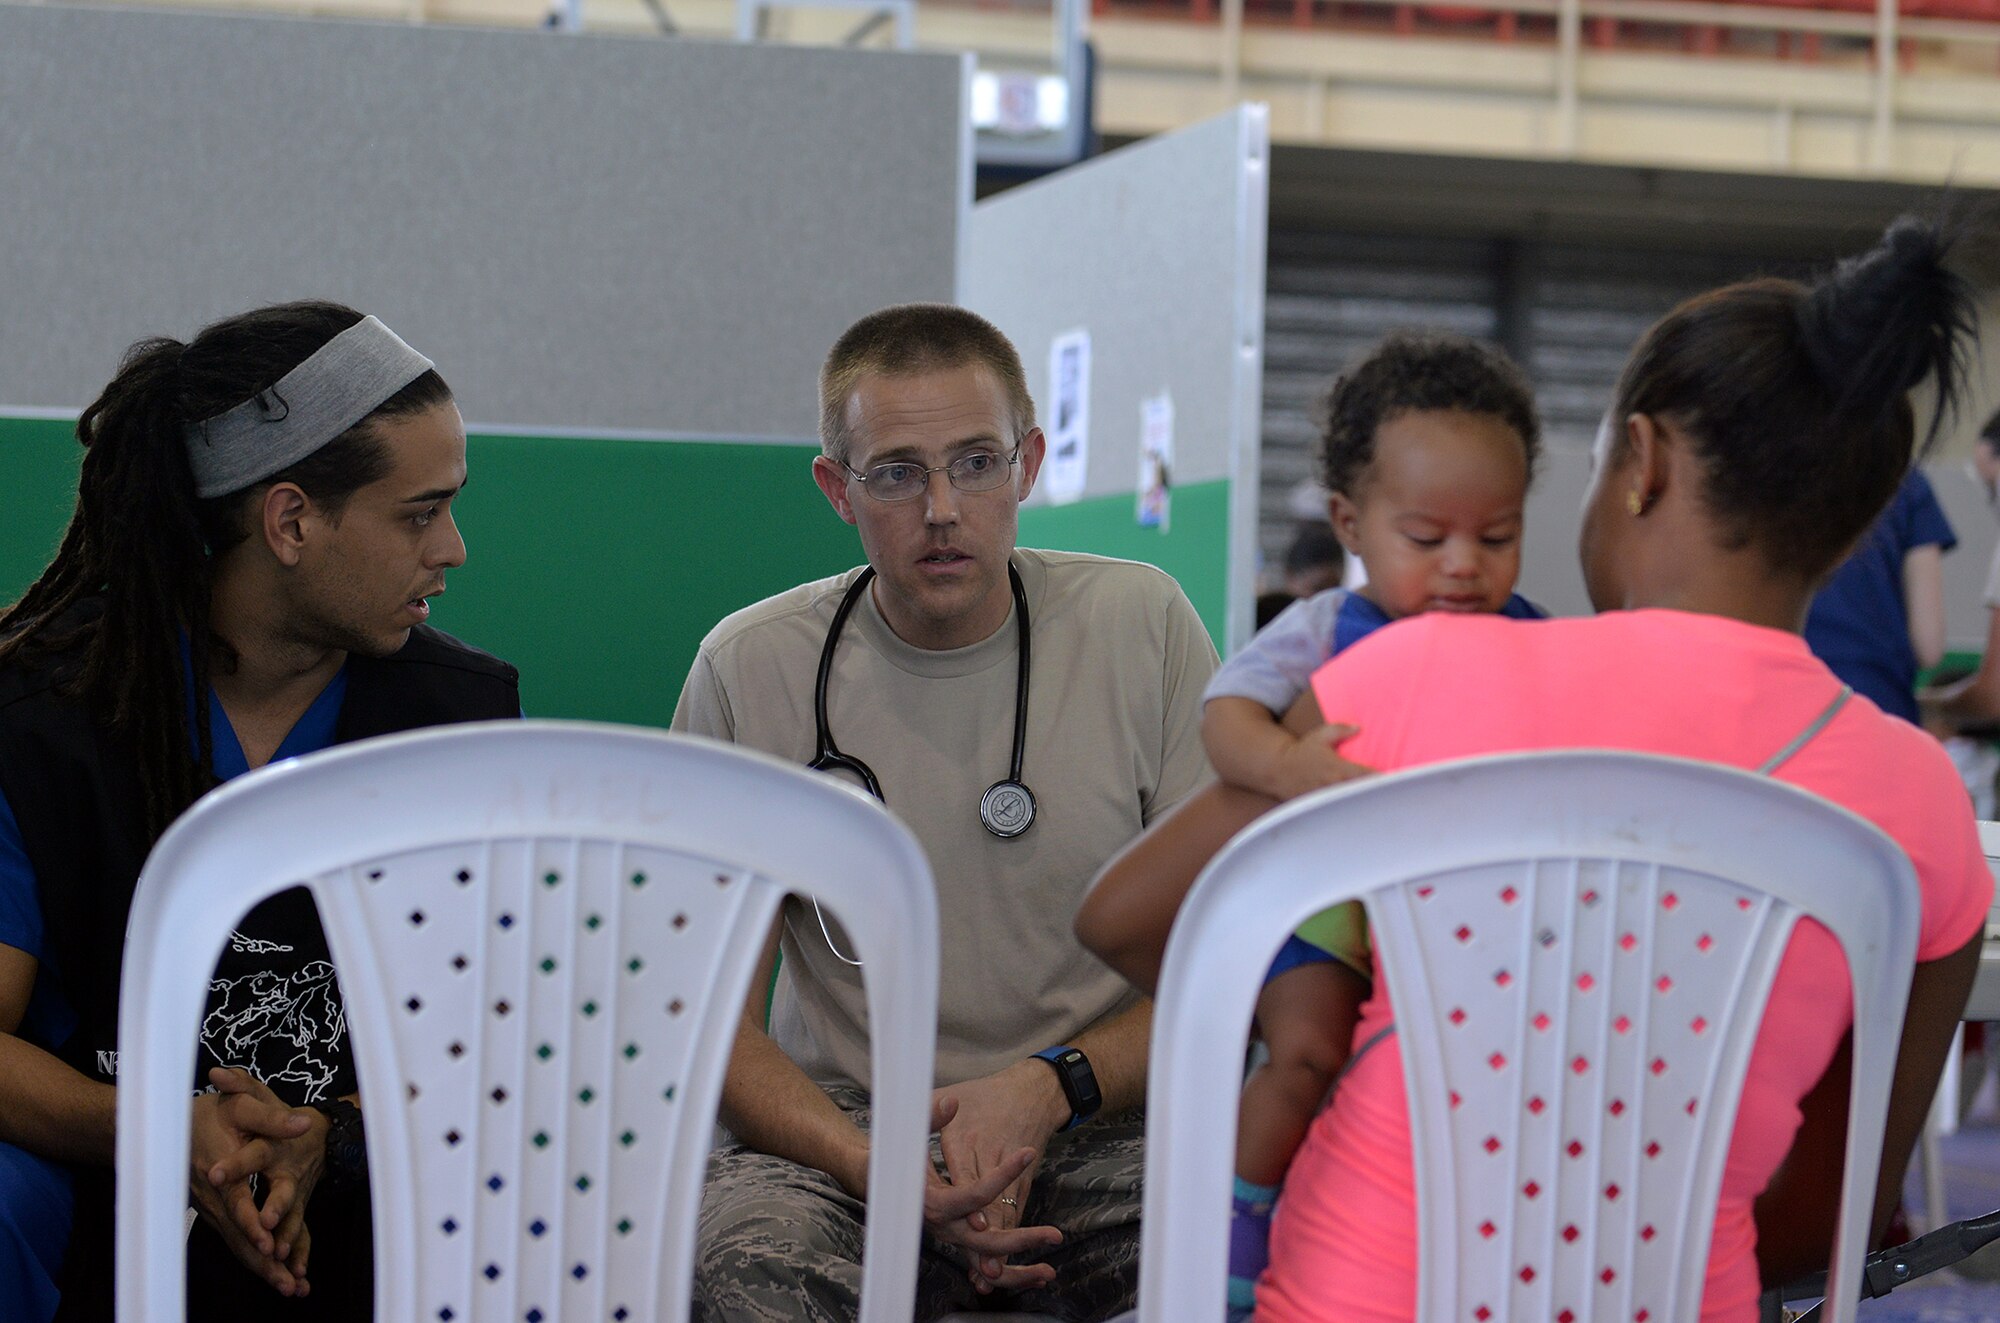 U.S. Air Force Maj. David Sayers, a pediatrician with the 21st Medical Operations Squadron out of Peterson Air Force Base, Colo., advises the mother of a patient with the assistance of a local medical student volunteer in Azua, Dominican Republic, March 14, 2017, during a medical readiness training exercise as part of NEW HORIZONS 2017. Non-governmental organization (NGO)/private voluntary organization and private sector participation in NEW HORIZONS, coordinated with 12th Air Force, U.S. Southern Command, the Department of State, and the U.S. agency for International Development, nurtures partnerships between the military services, governmental, NGOs, and host-nation teams to ensure partnerships are in place in the event of a regional contingency requiring cooperative solutions. (U.S. Air Force photo by Master Sgt. Karen J. Tomasik)